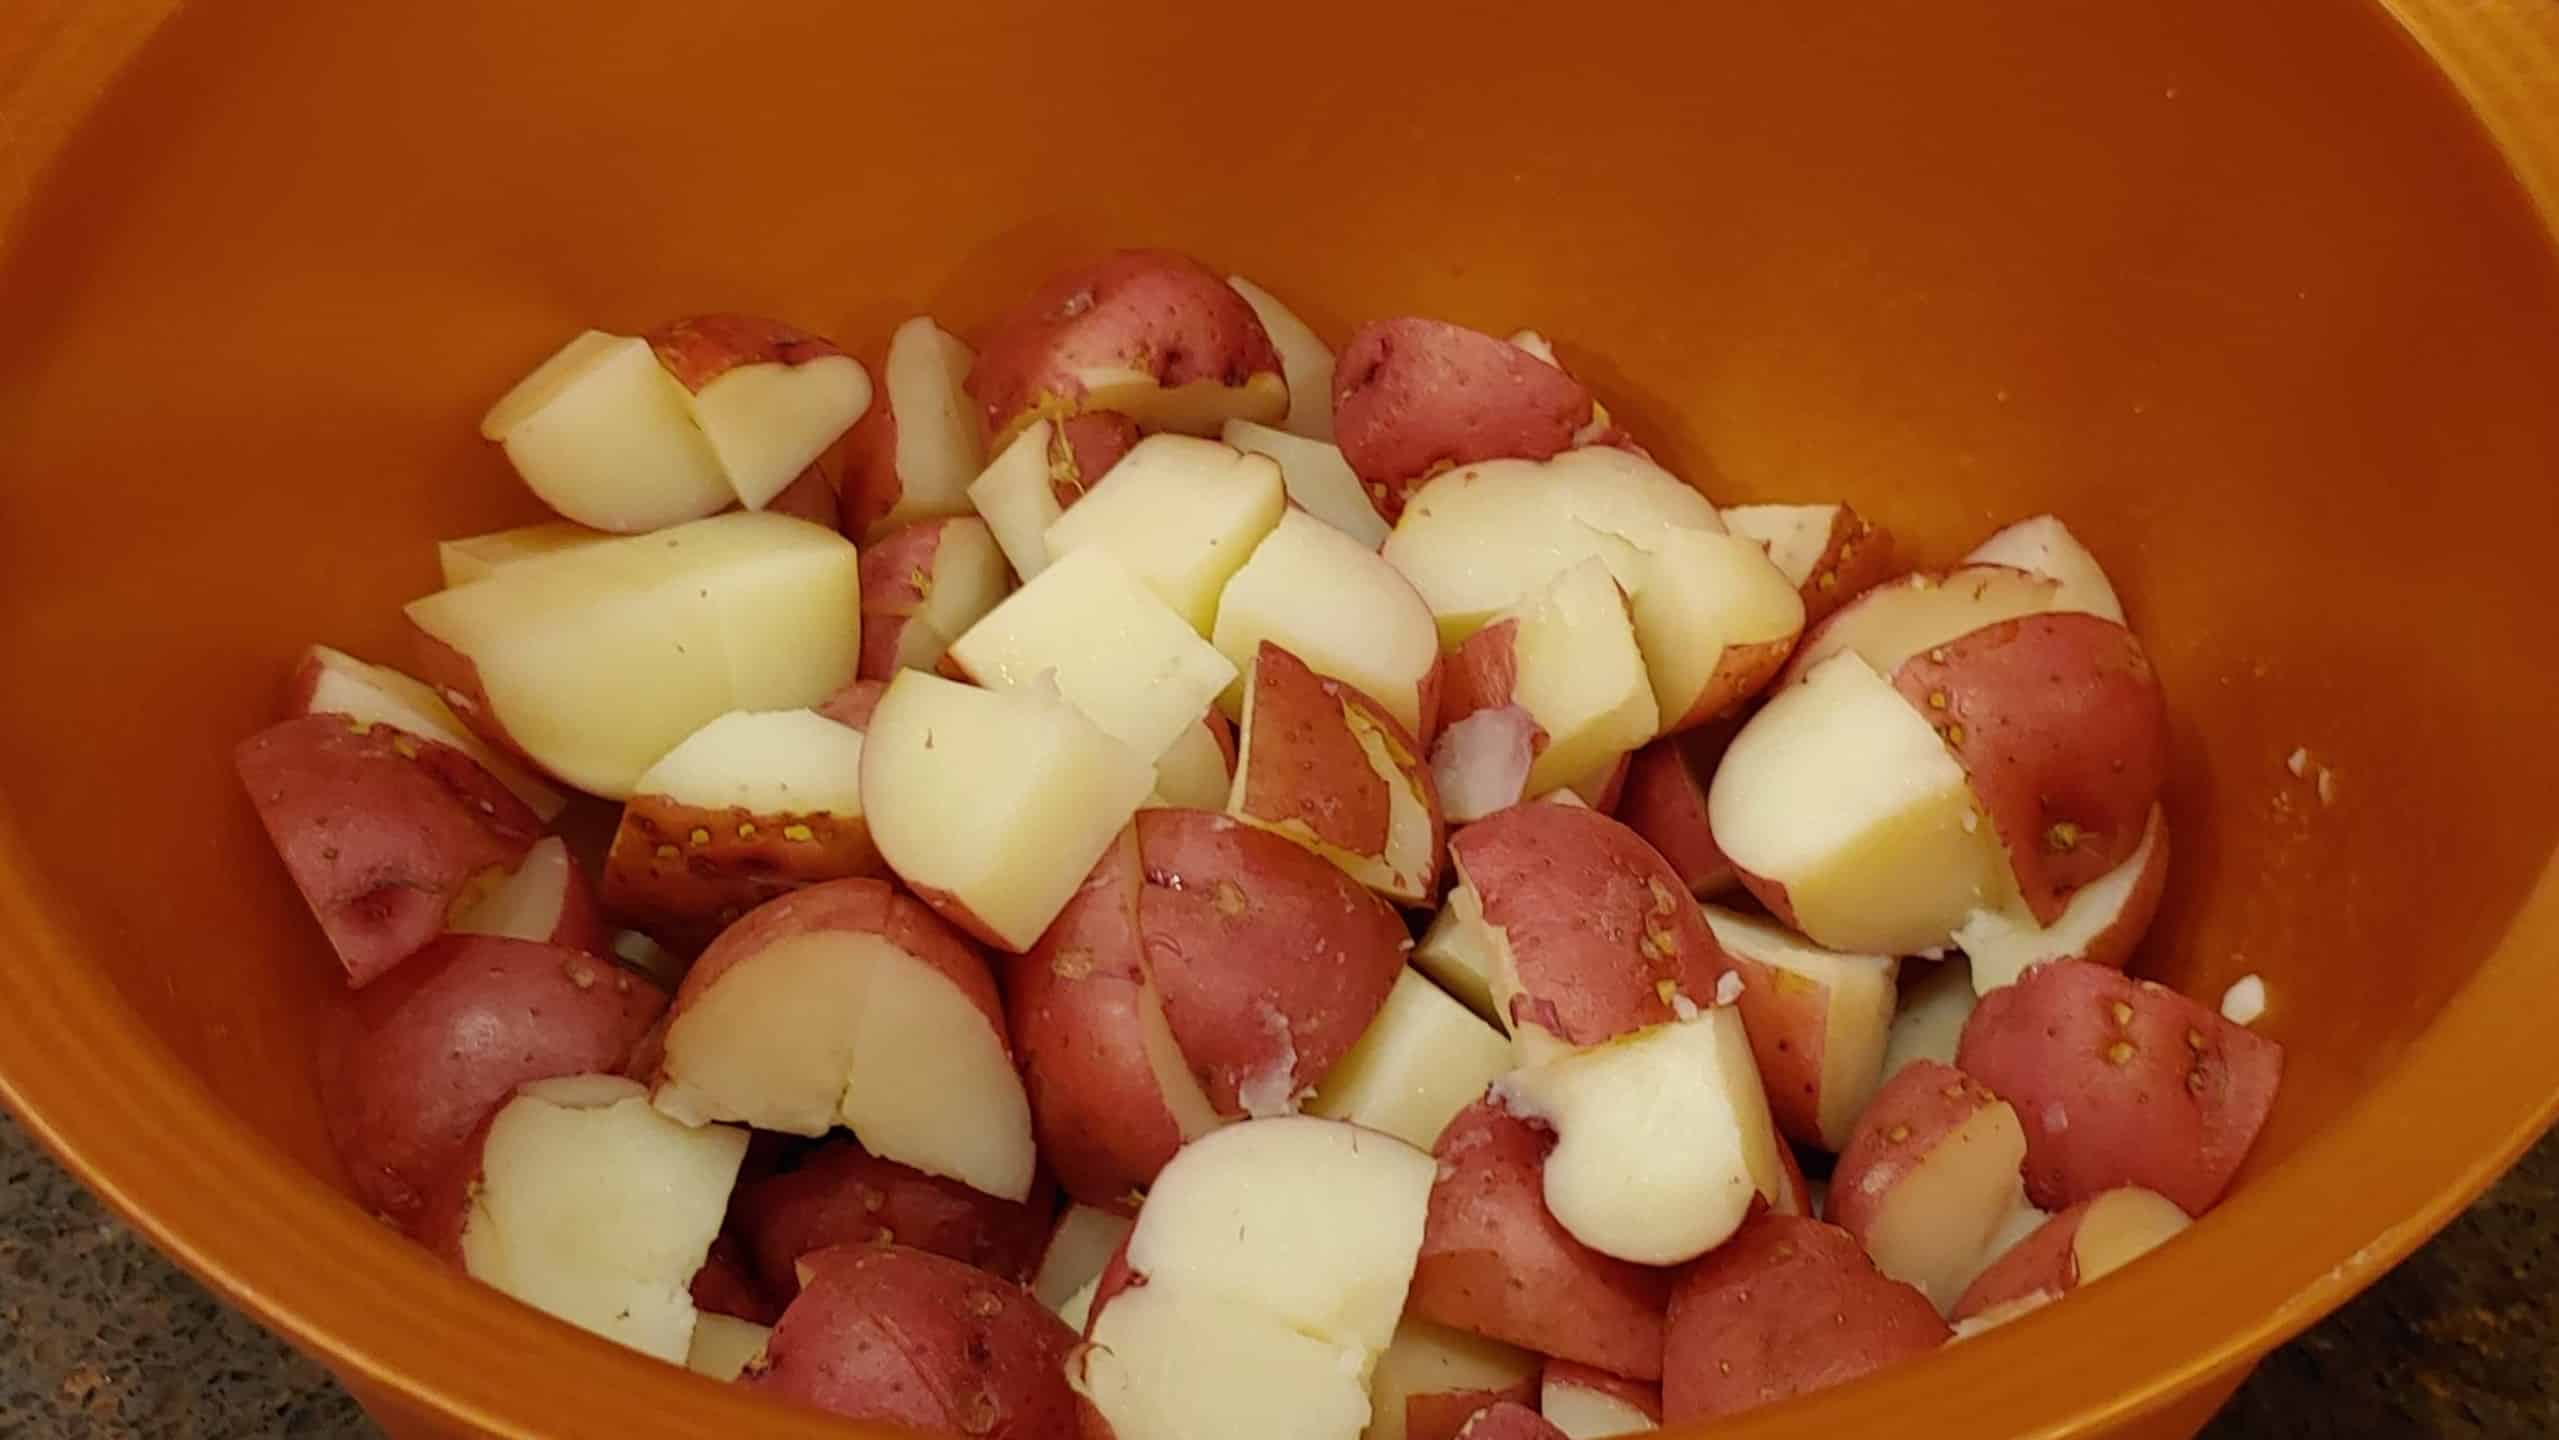 Cooked cut up potatoes - Dining in with Danielle